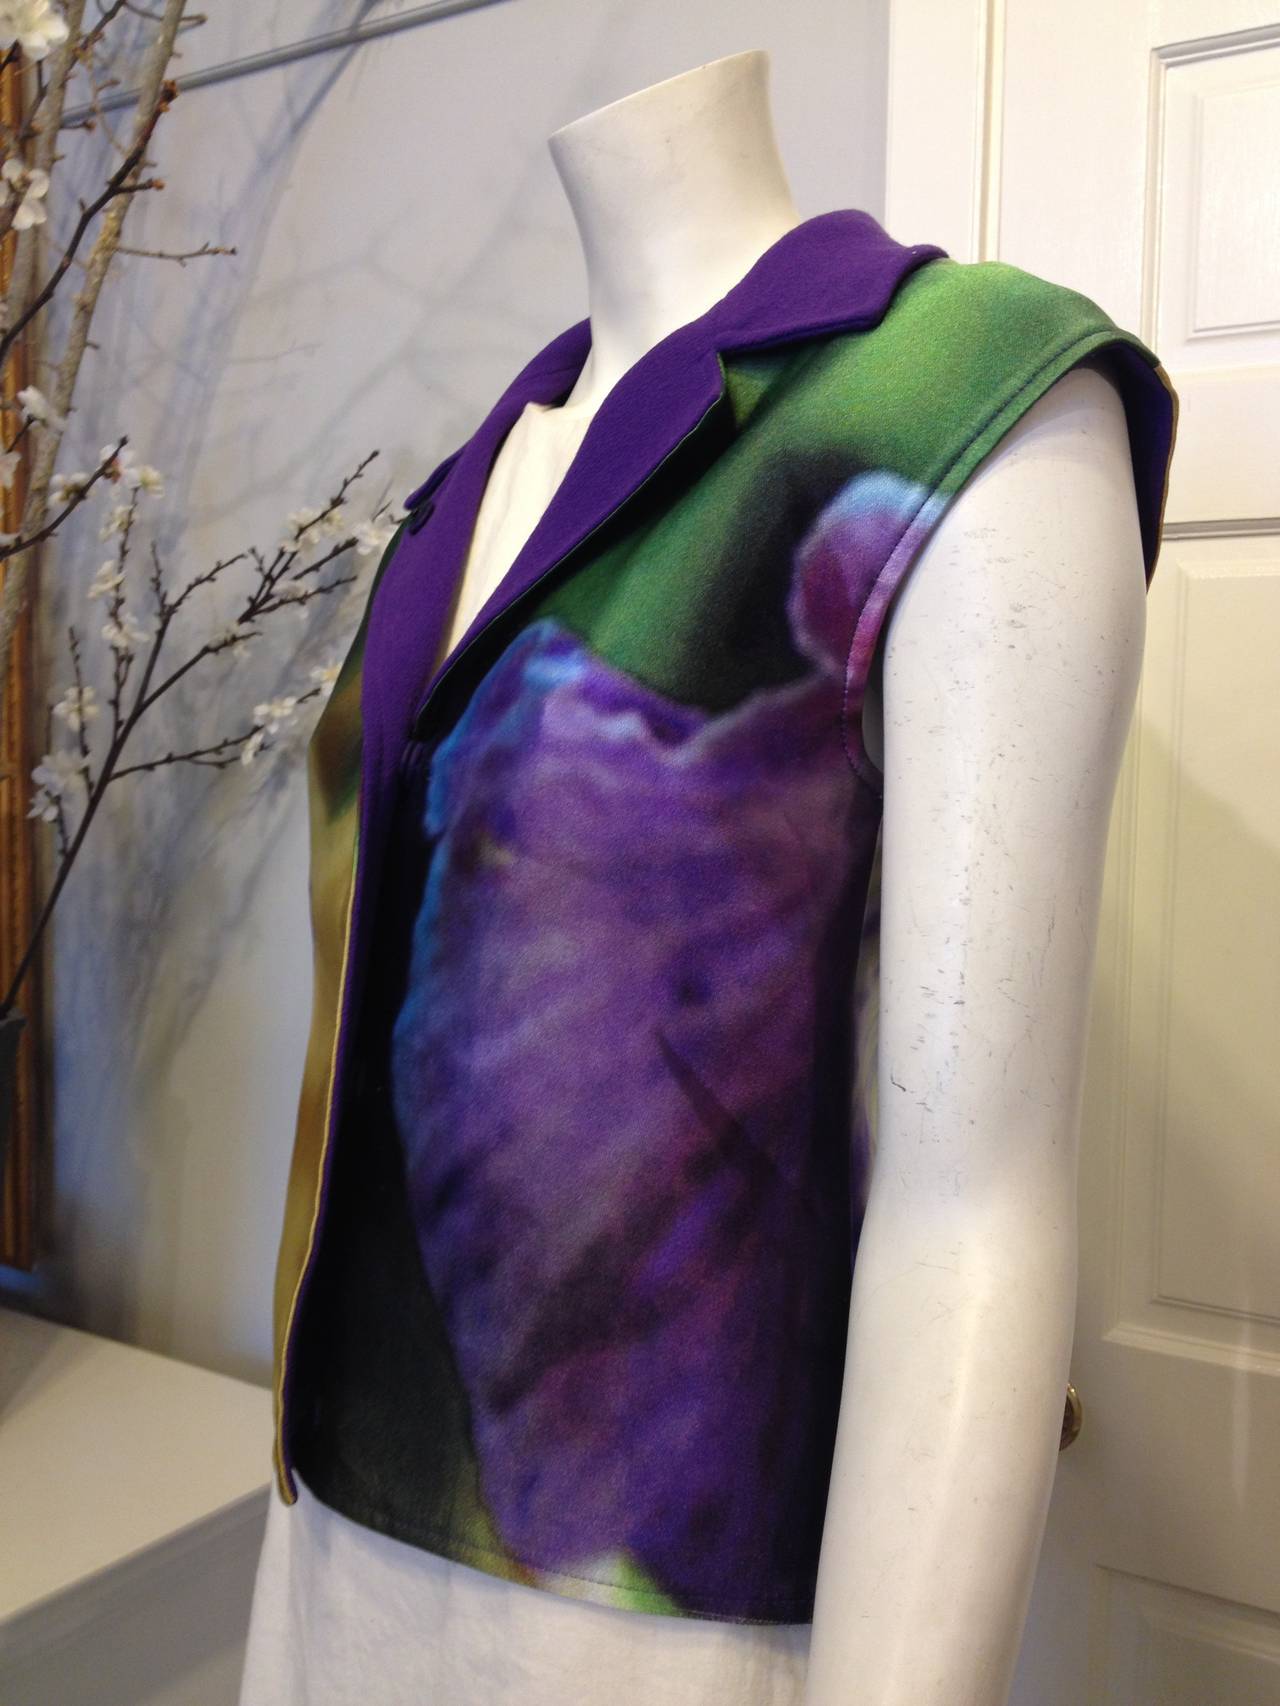 Covered in a sweeping, dreamy, marvelous floral print in shades of emerald, royal purple, warm flax gold, and magenta, it's the perfect vest for any event this year. The backing is a gorgeous deep purple textured fabric, while the outer panels are